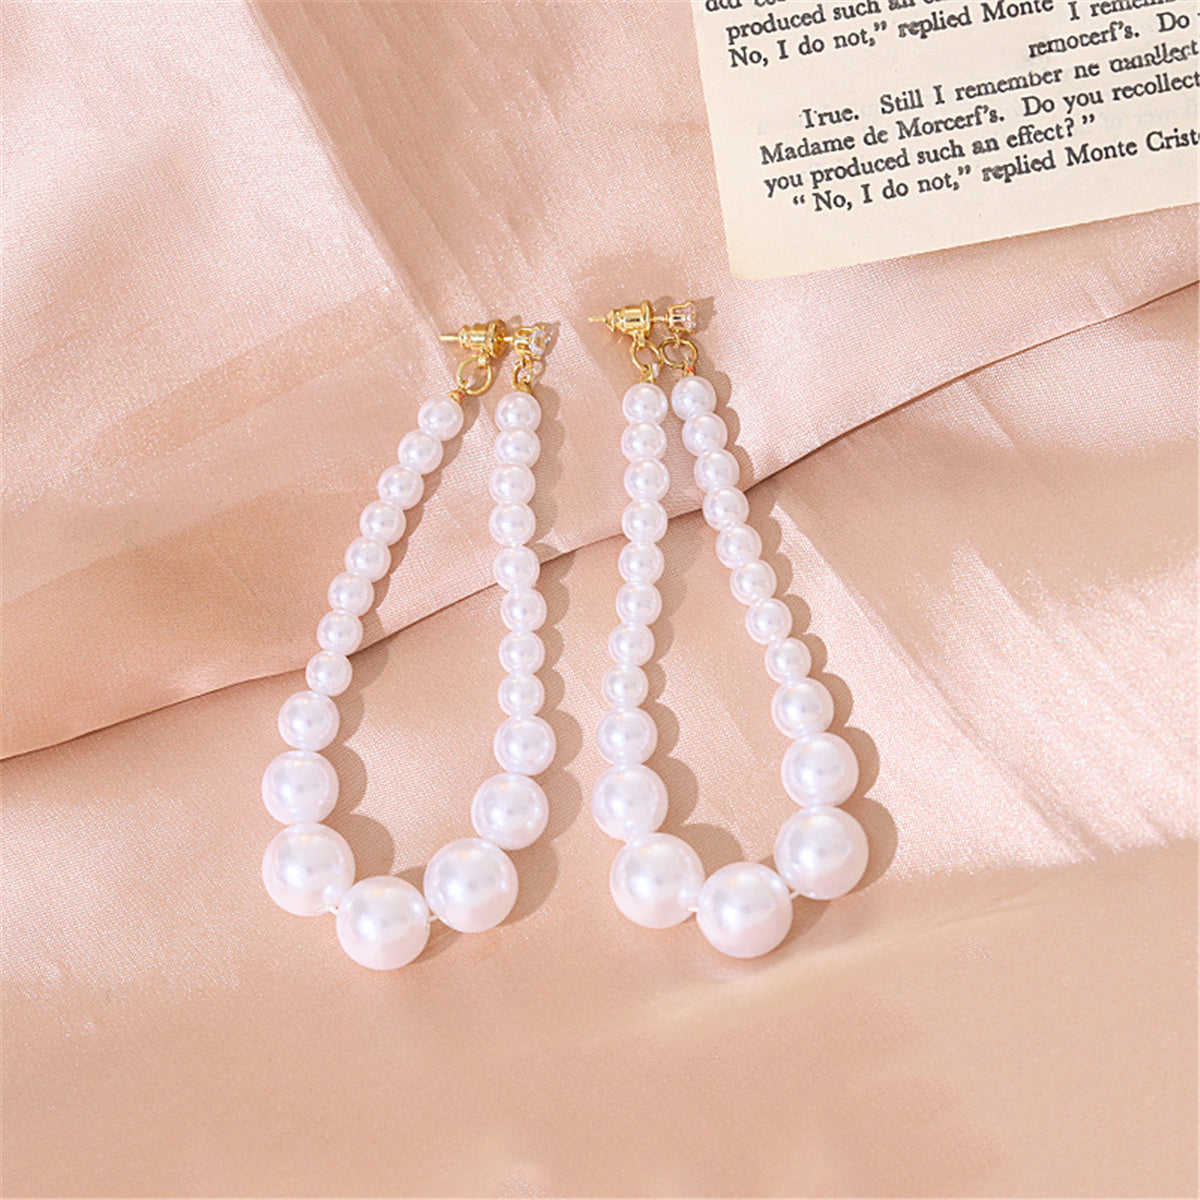 Cubic Zirconia & Pearl 18K Gold-Plated Beaded Chain Drop Earrings